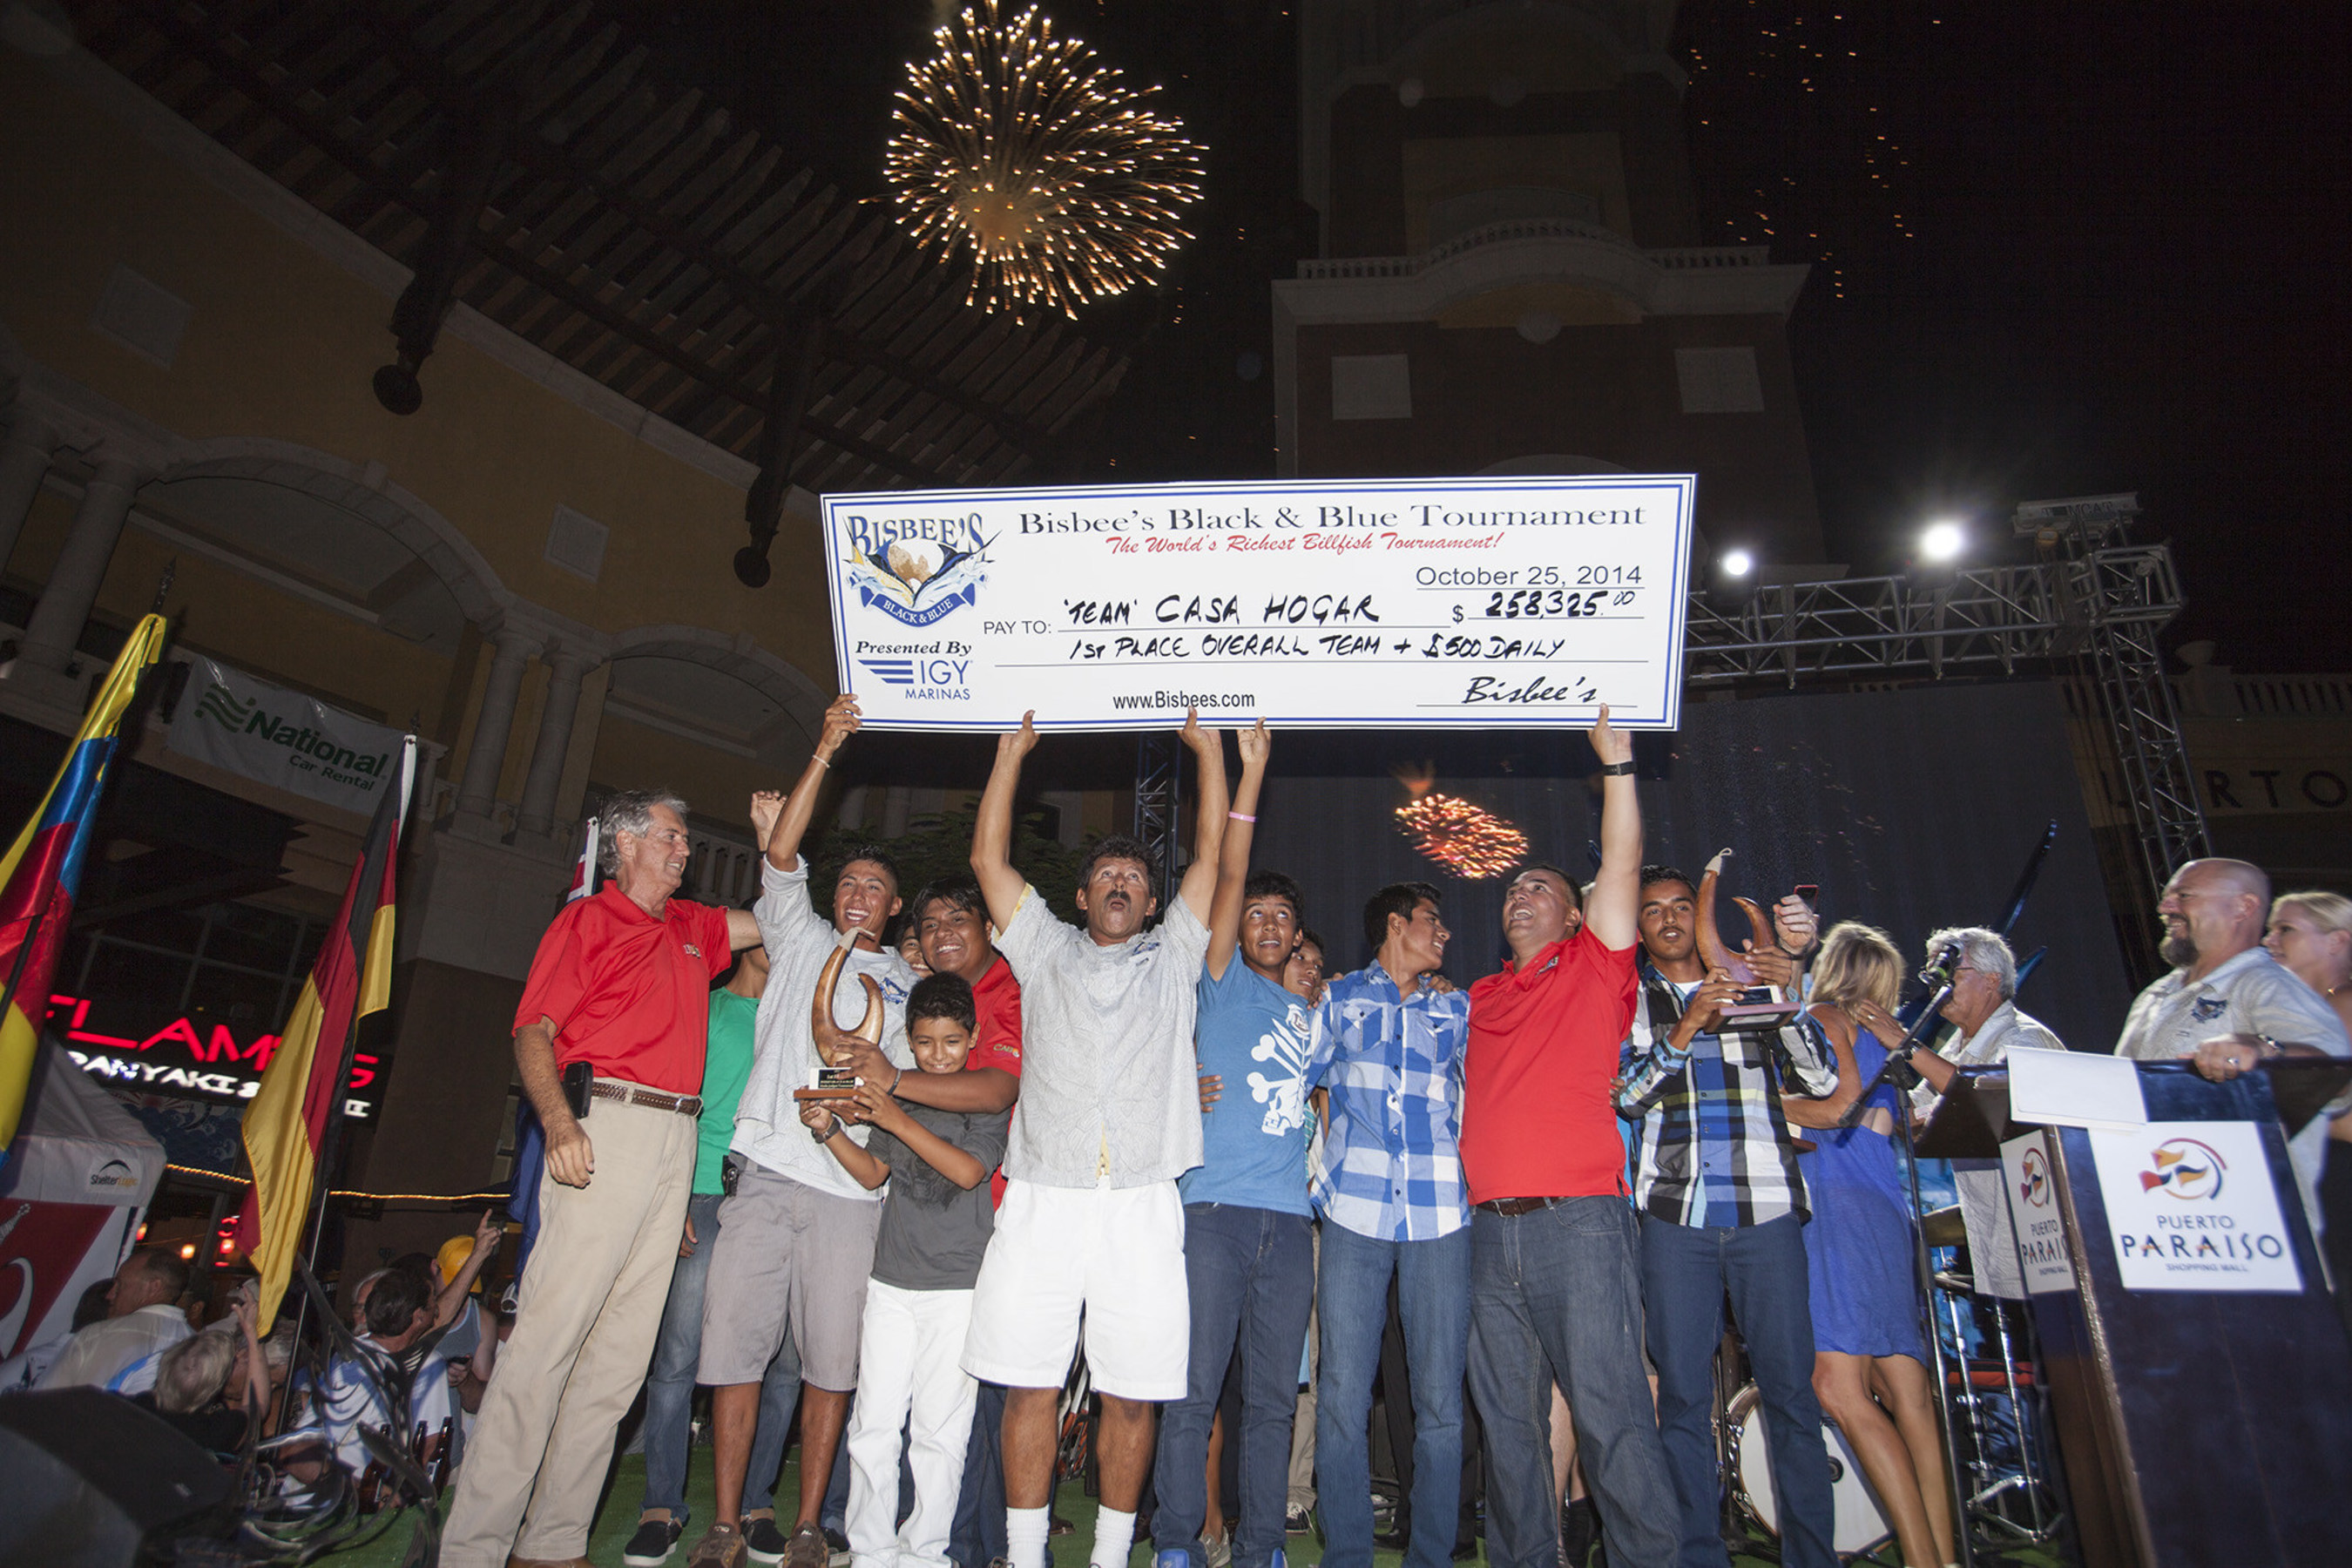 A group of orphans and their caregiver from Cabo San Lucas' Casa Hogar wins $250K in Bisbee's Black & Blue Fishing Tournament. Despite doubts about the tournament in the wake of the devastation of Hurricane Odile, 129 boats entered this year and more than $2 million in total prize money was given out.